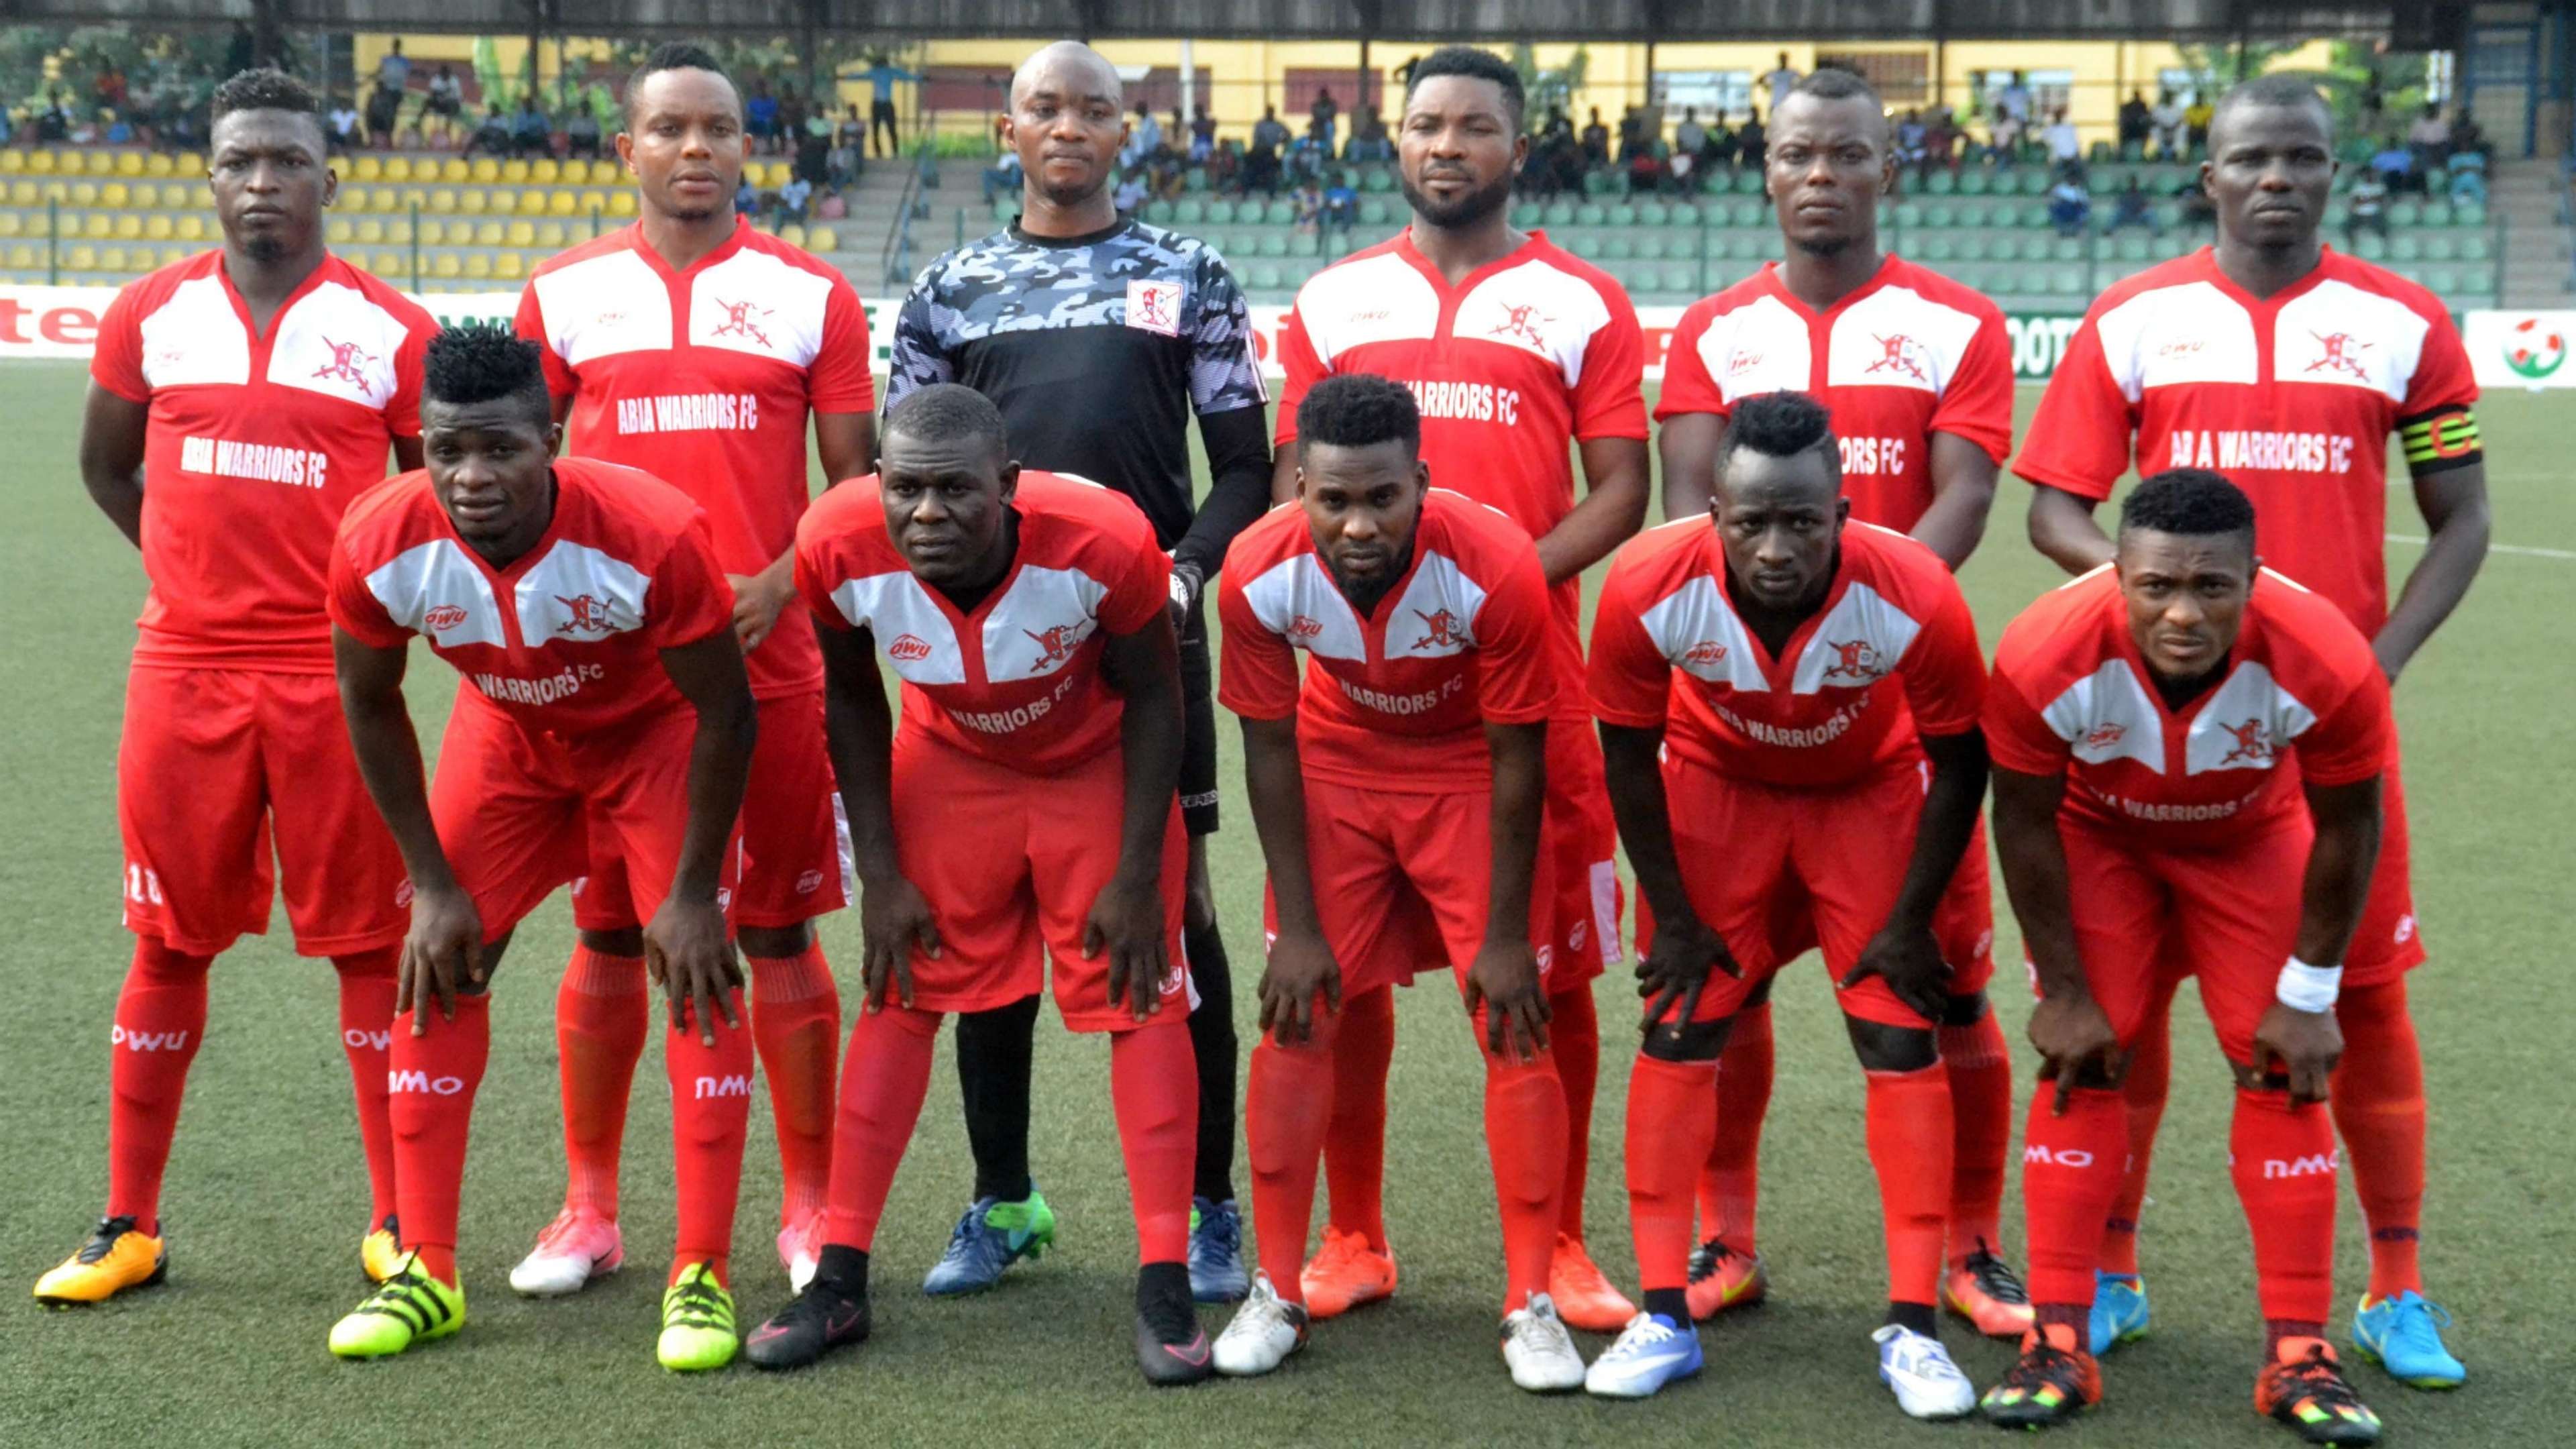 Abia Warriors - 2018 Federation Cup